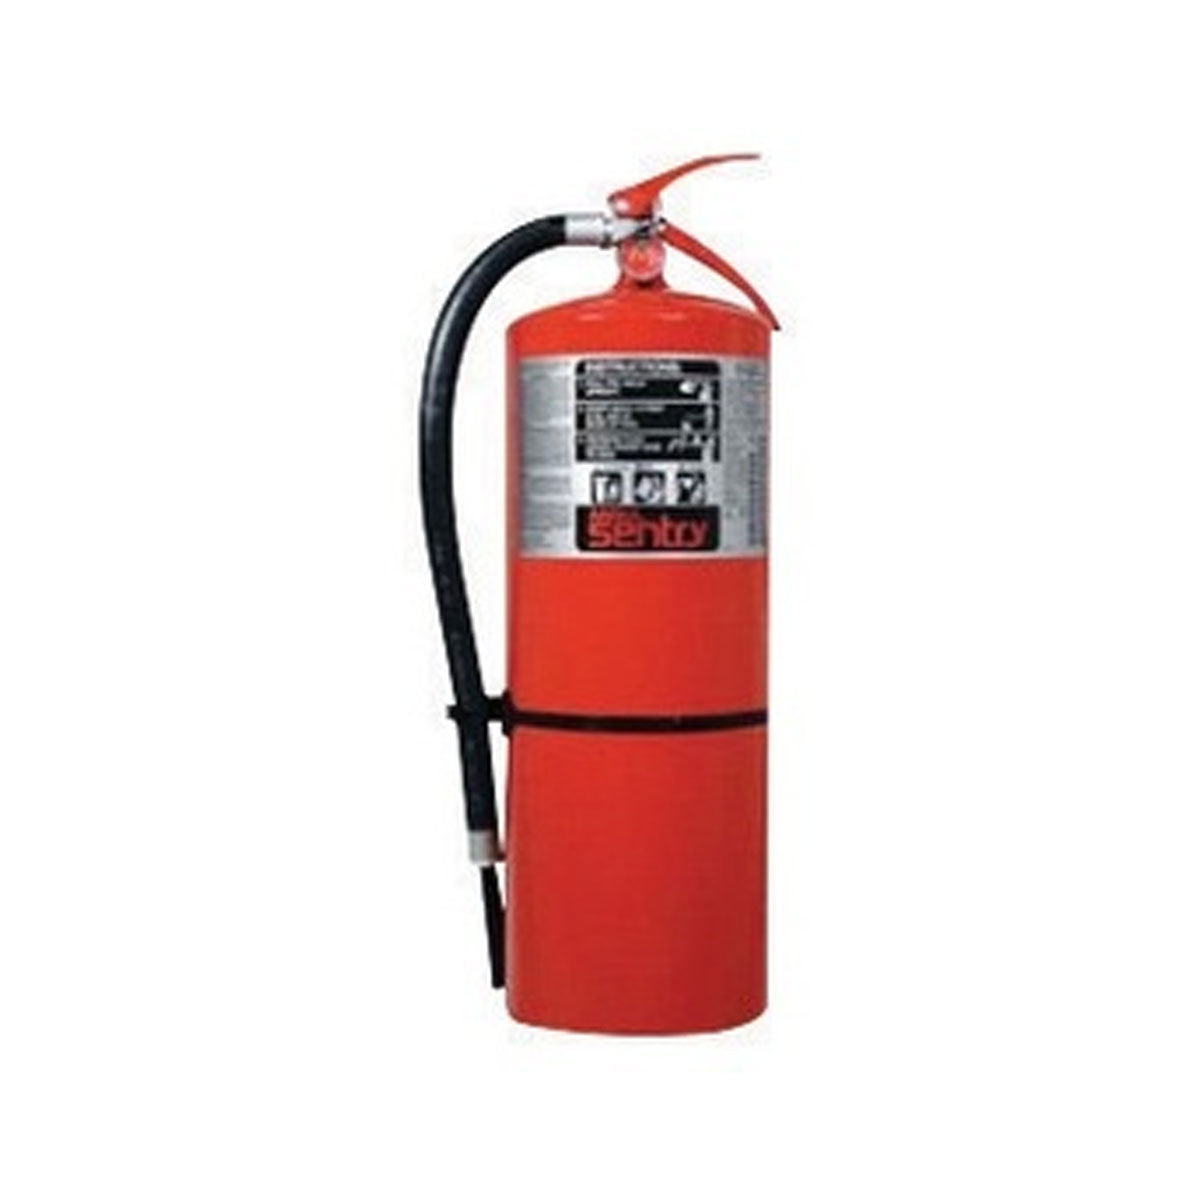 Fire Extinguisher, Sentry, Model AA20-1, Foray ABC Dry Chemical, Stored Pressure, 20 lb., UL/ULC Rating: 10-A:120-B:C, Approvals: UL/ULC/USCG**, (434747) 48 EA/PLT